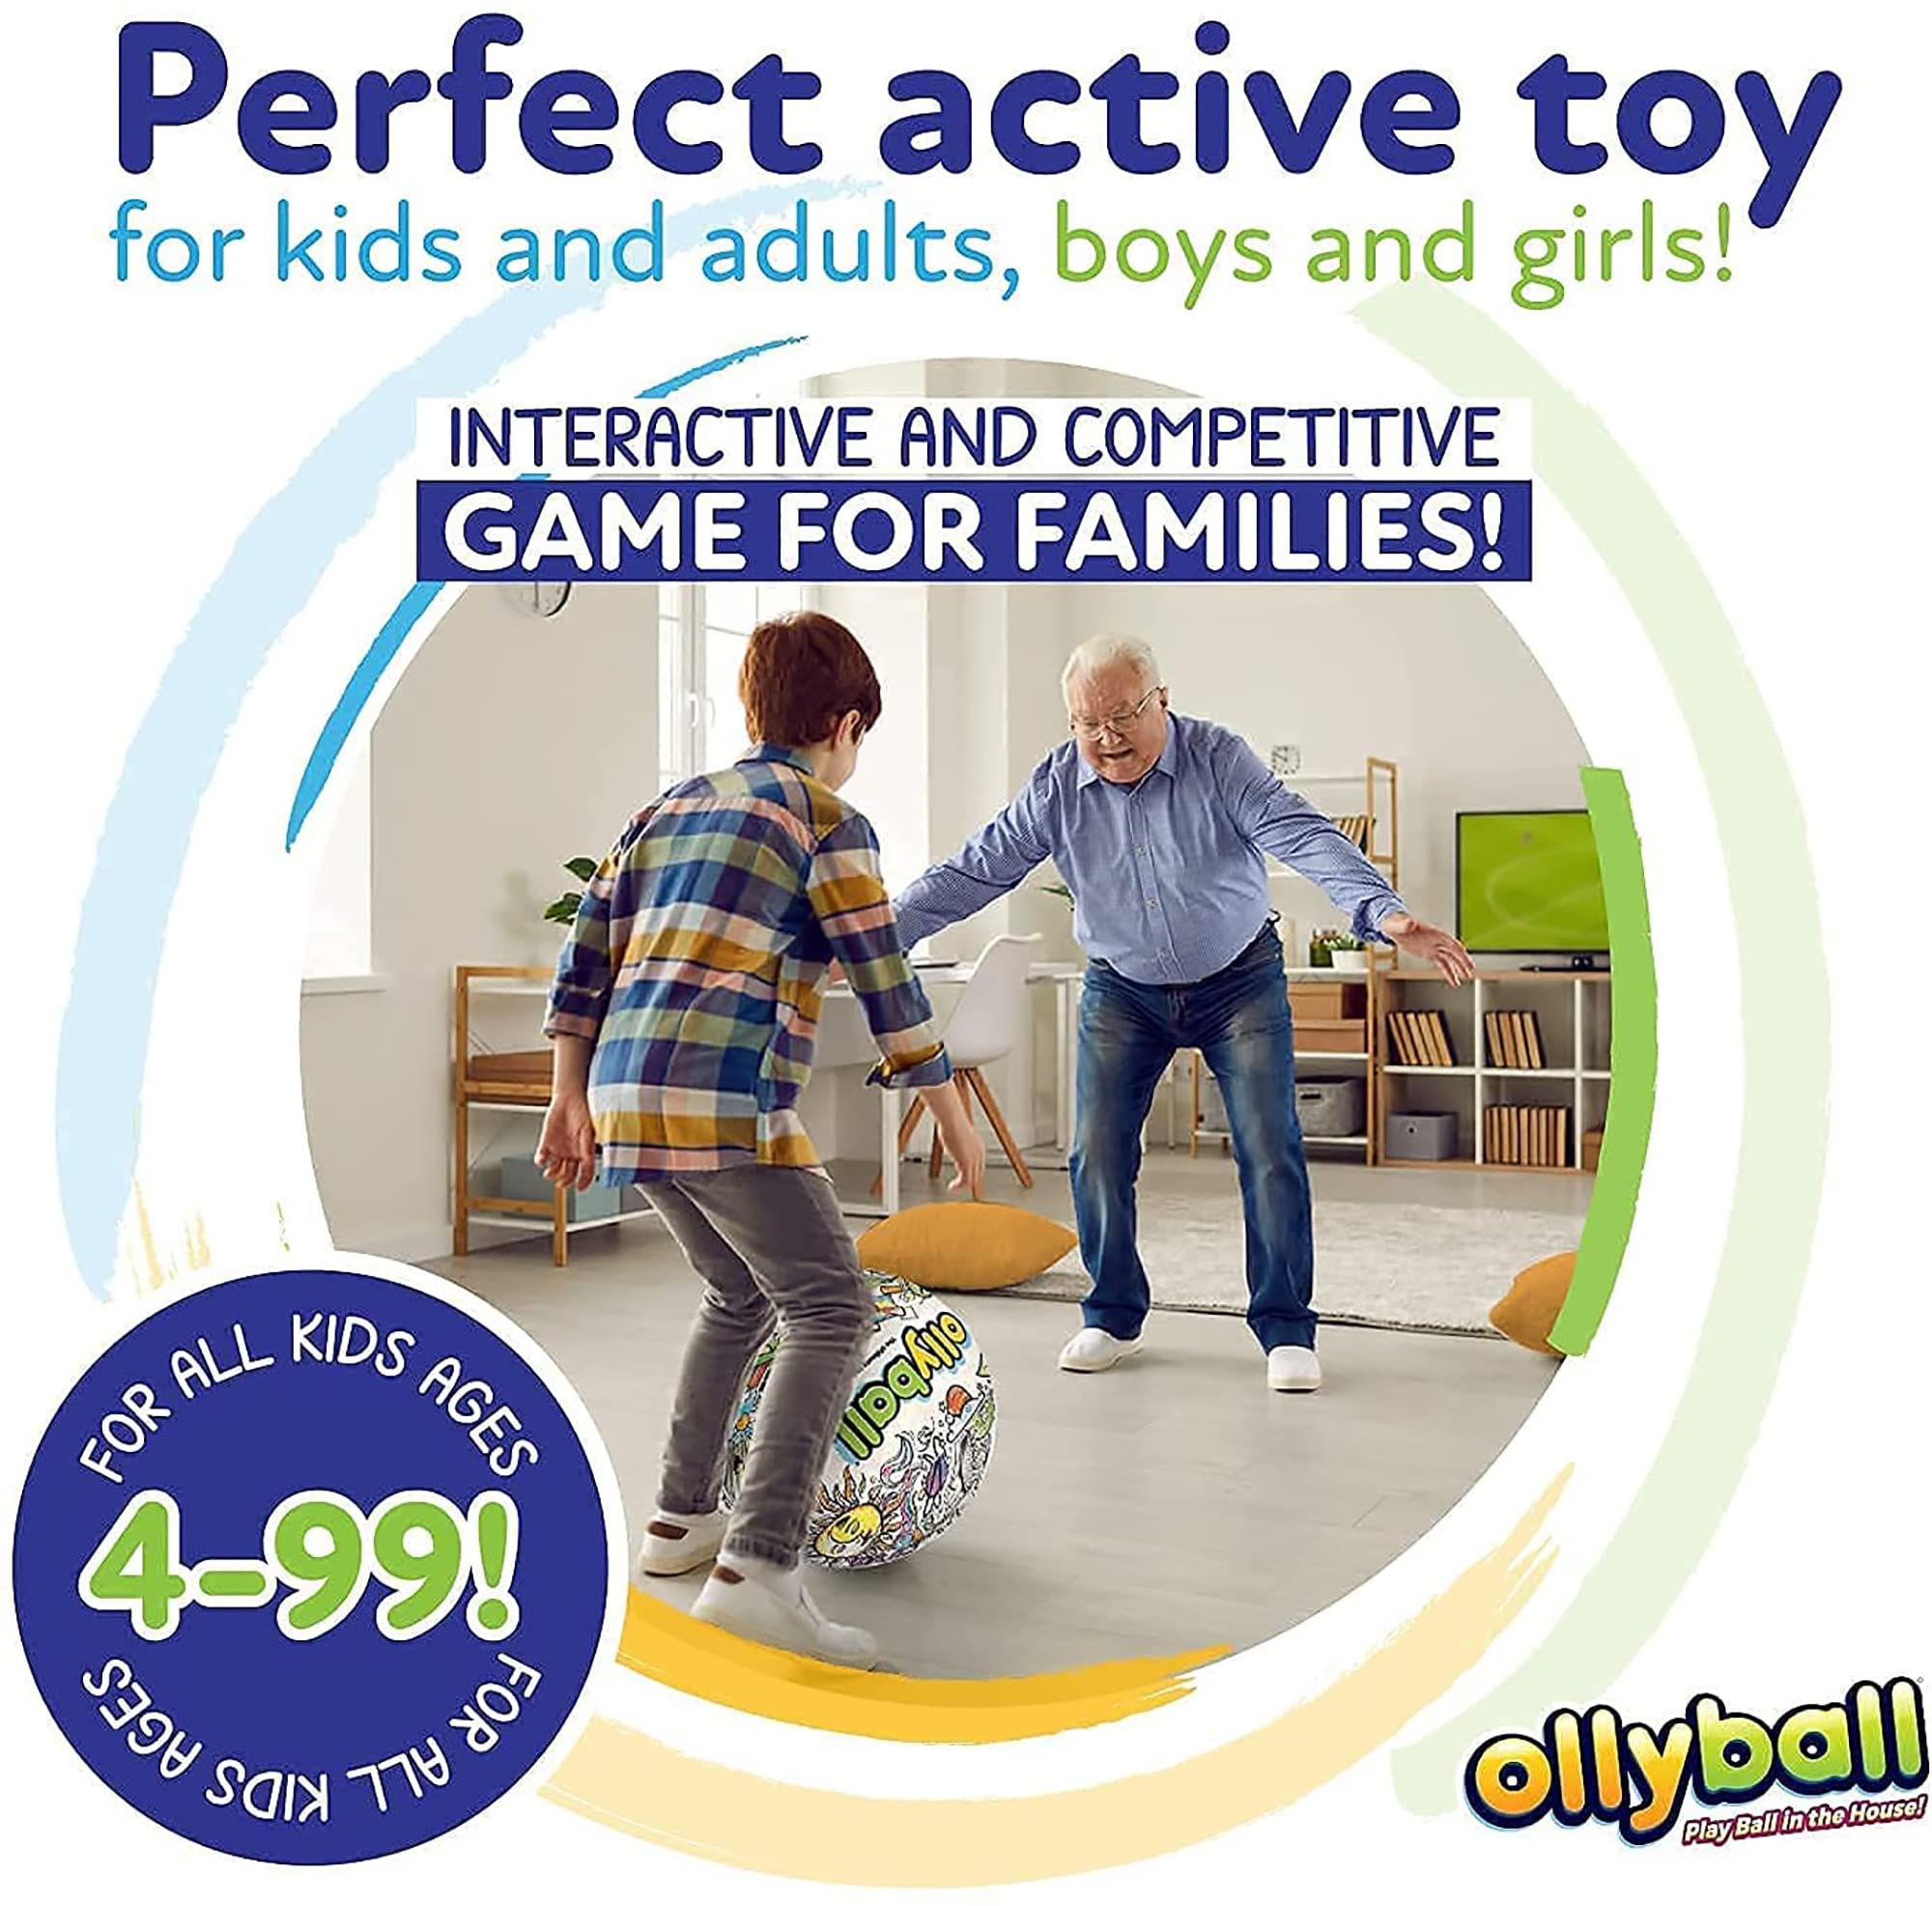 The Original Ollyball - The Ultimate Indoor & Outdoor Play Ball for Kids and Parents!